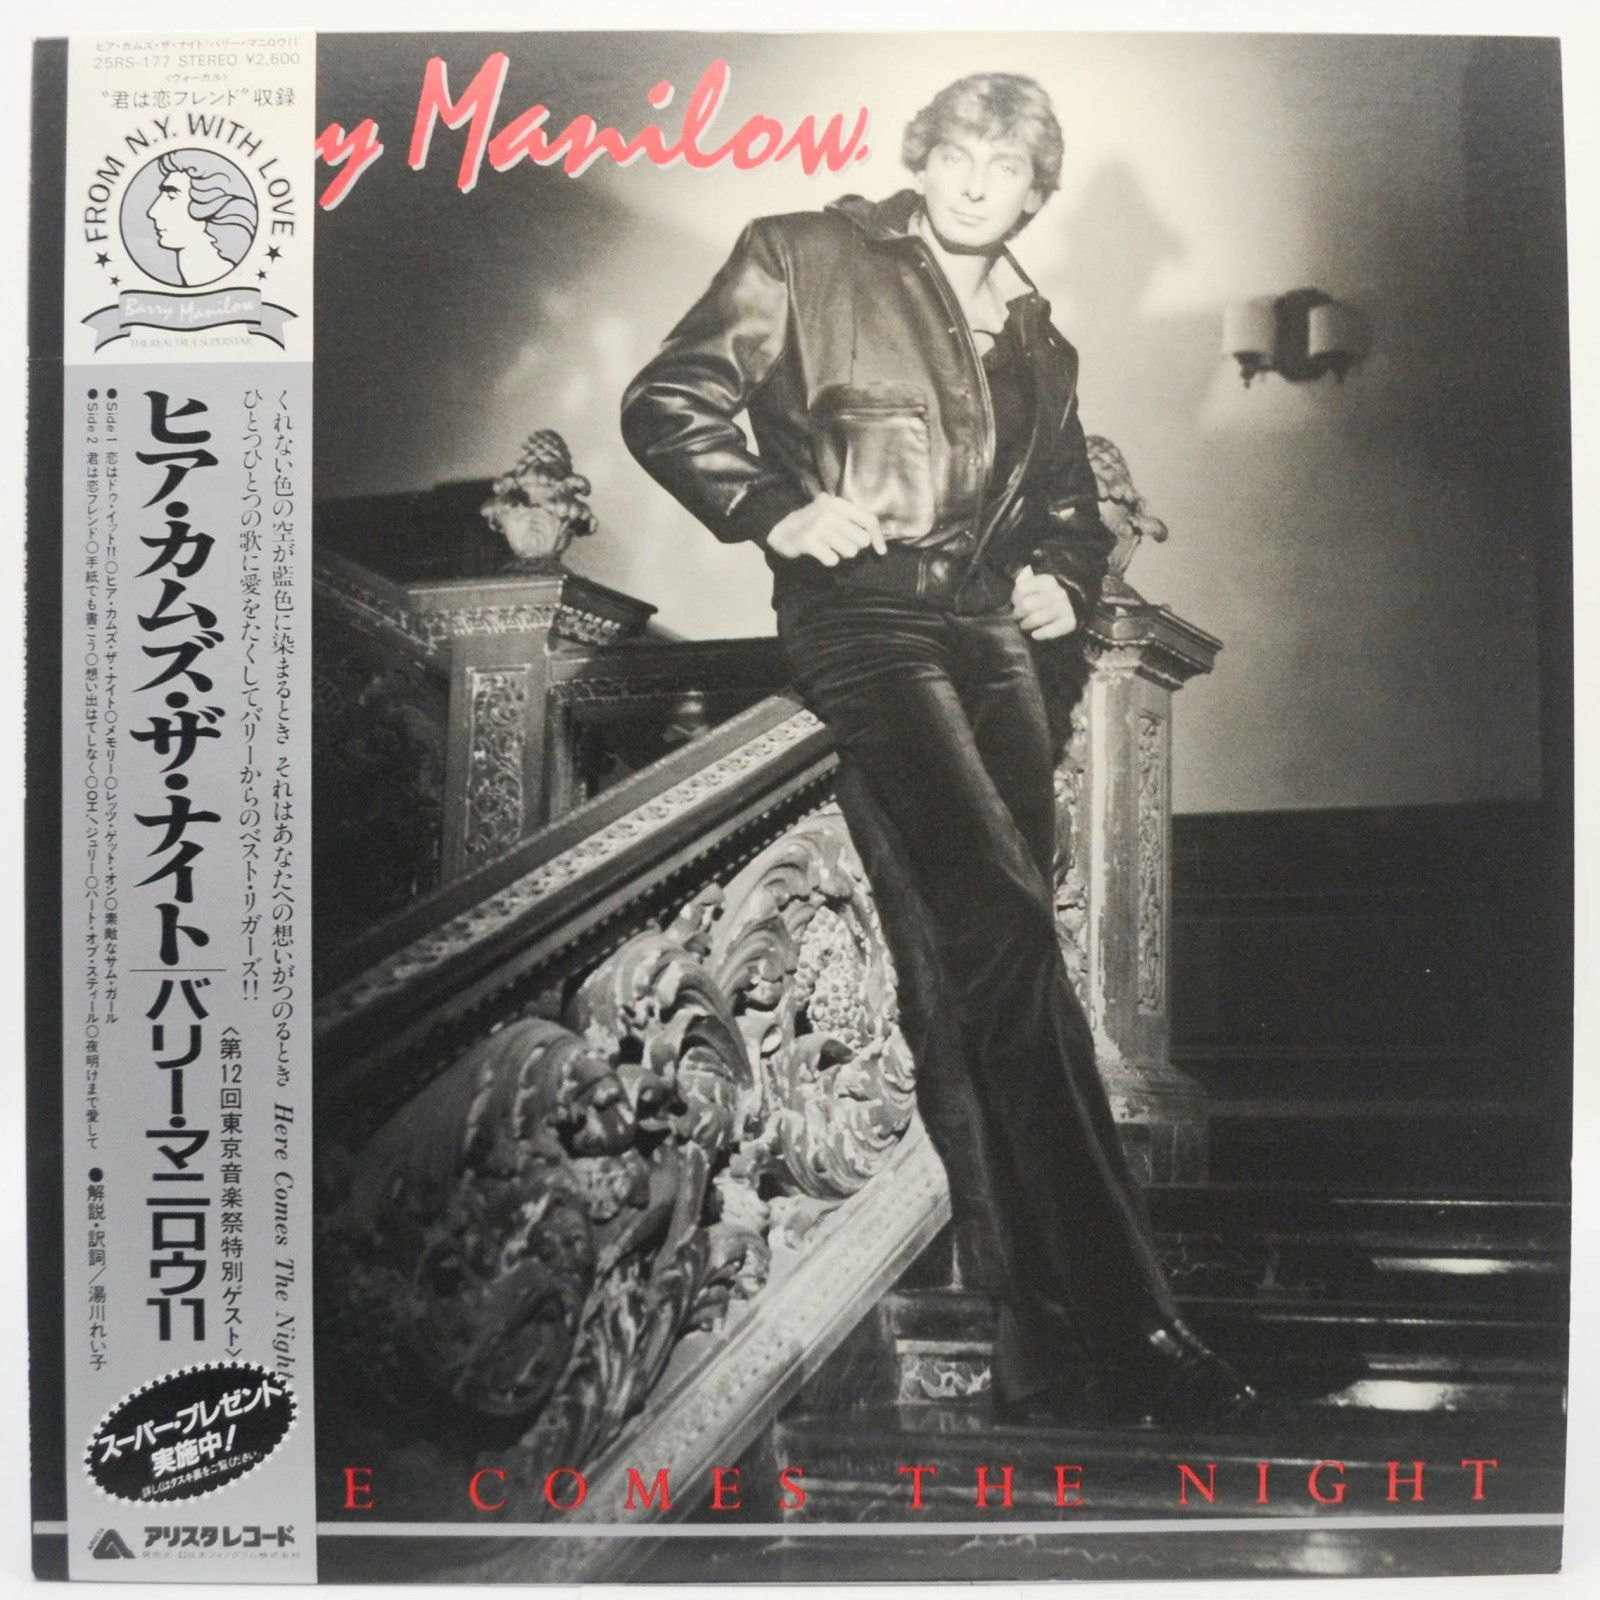 Barry Manilow — Here Comes The Night, 1982